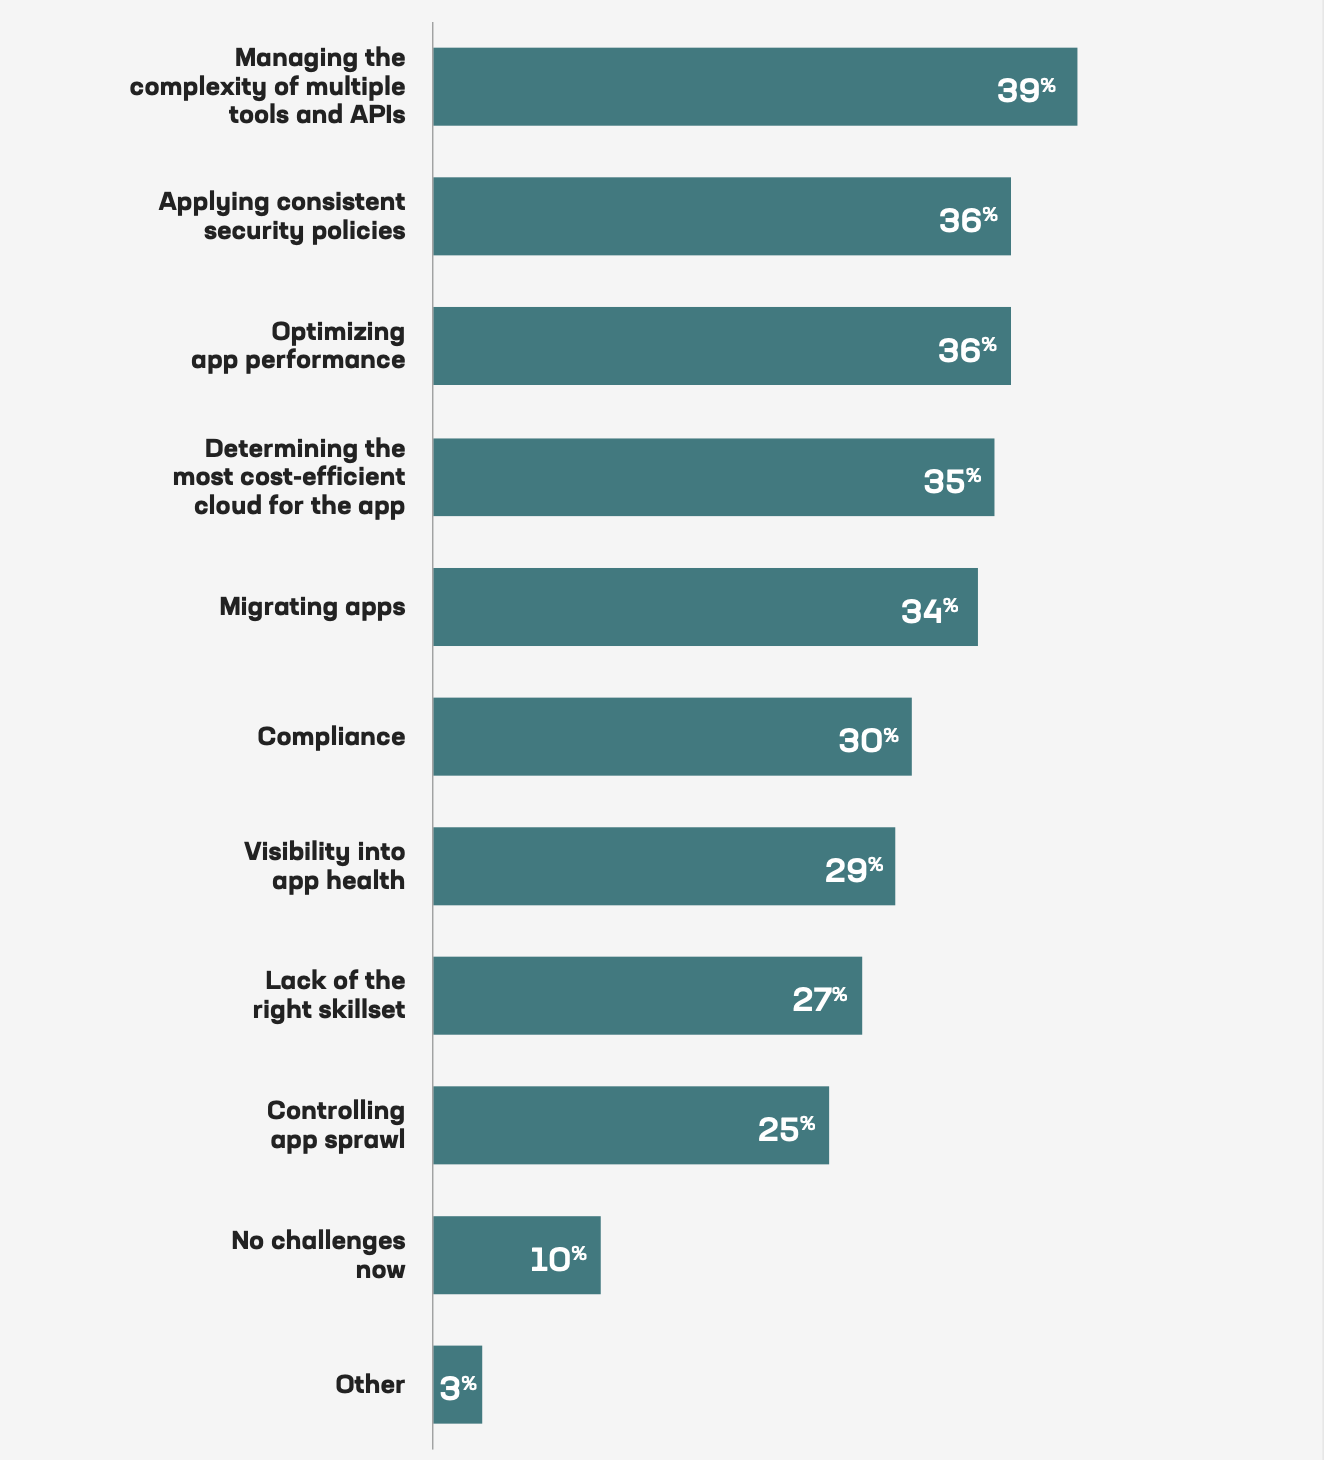 Poll results for challenges people currently have with deploying applications in multiple clouds. Complexity and security issues continue, while visibility— number 1 in 2022—fell to seventh.